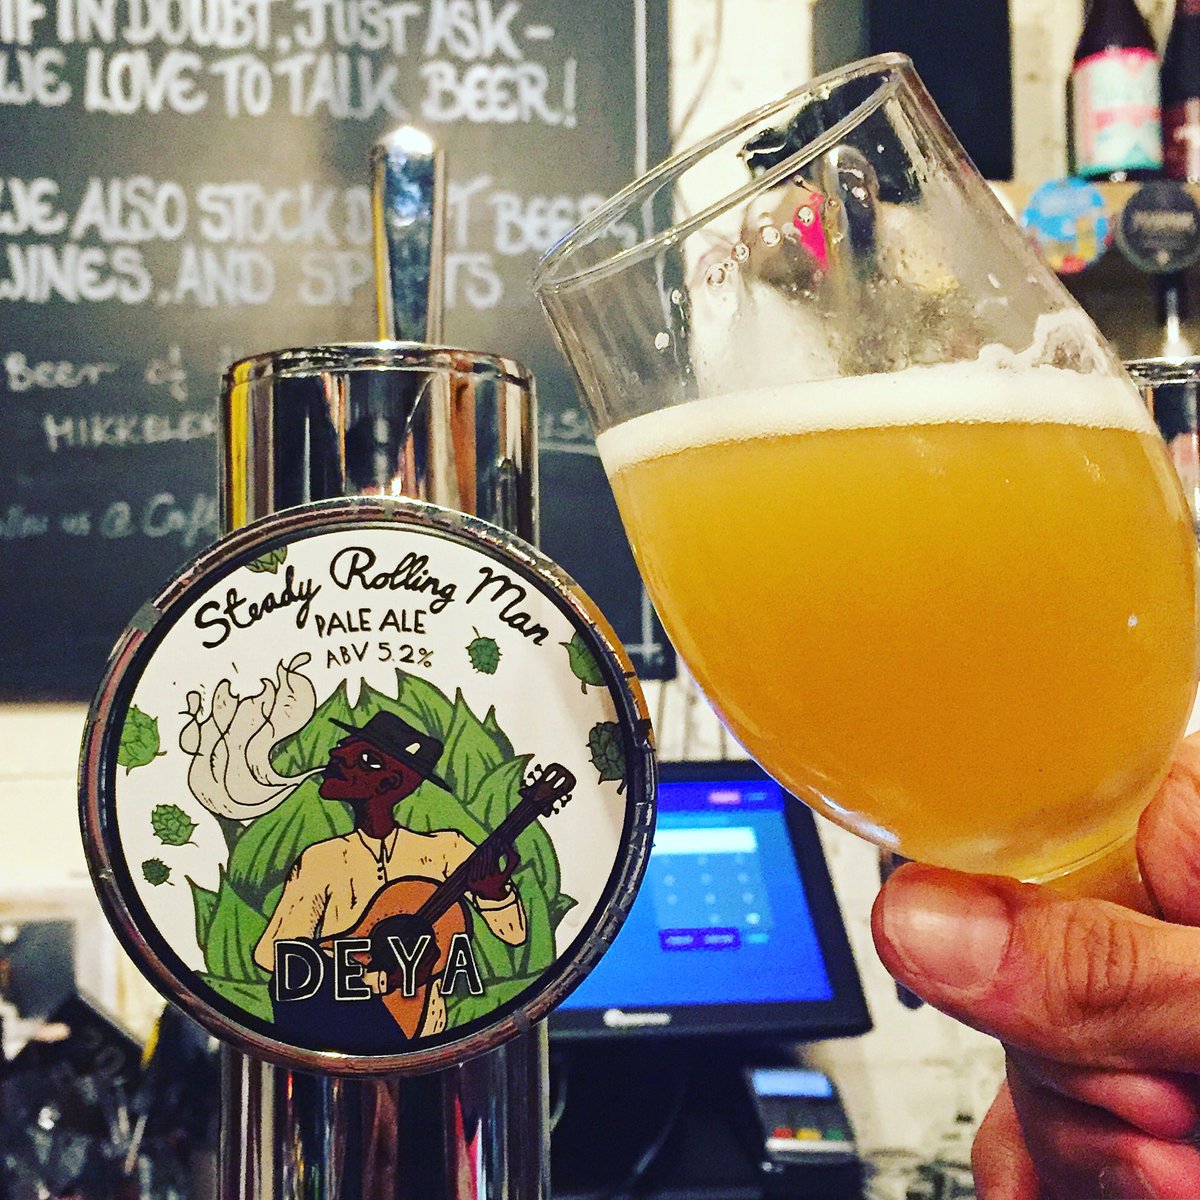 This #DEYA is tasting AMAZING 🙃🍻 I implore ya'll to try it, it's beautiful - On tap now @CraftTooting #craftbeer #SteadyRollingMan 👊🍻